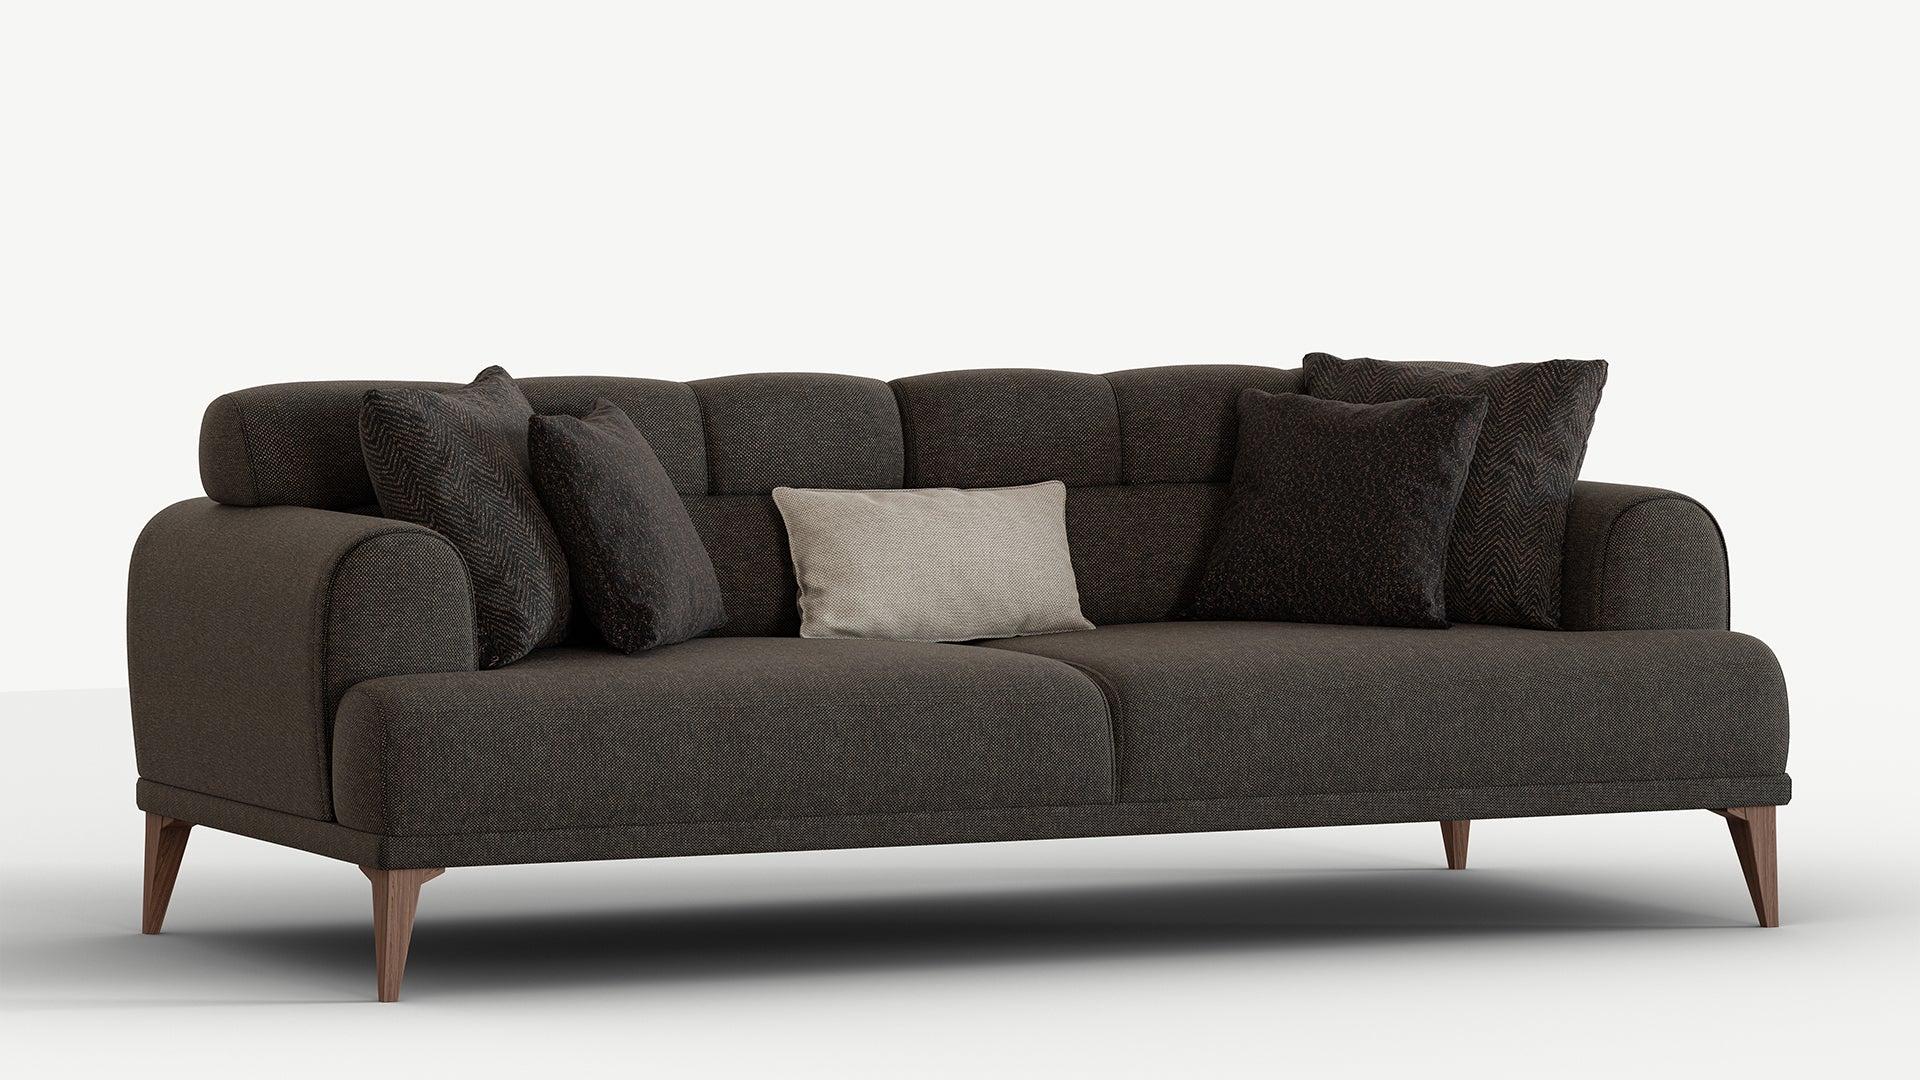 Madrid 3 Seater Sofa Bed